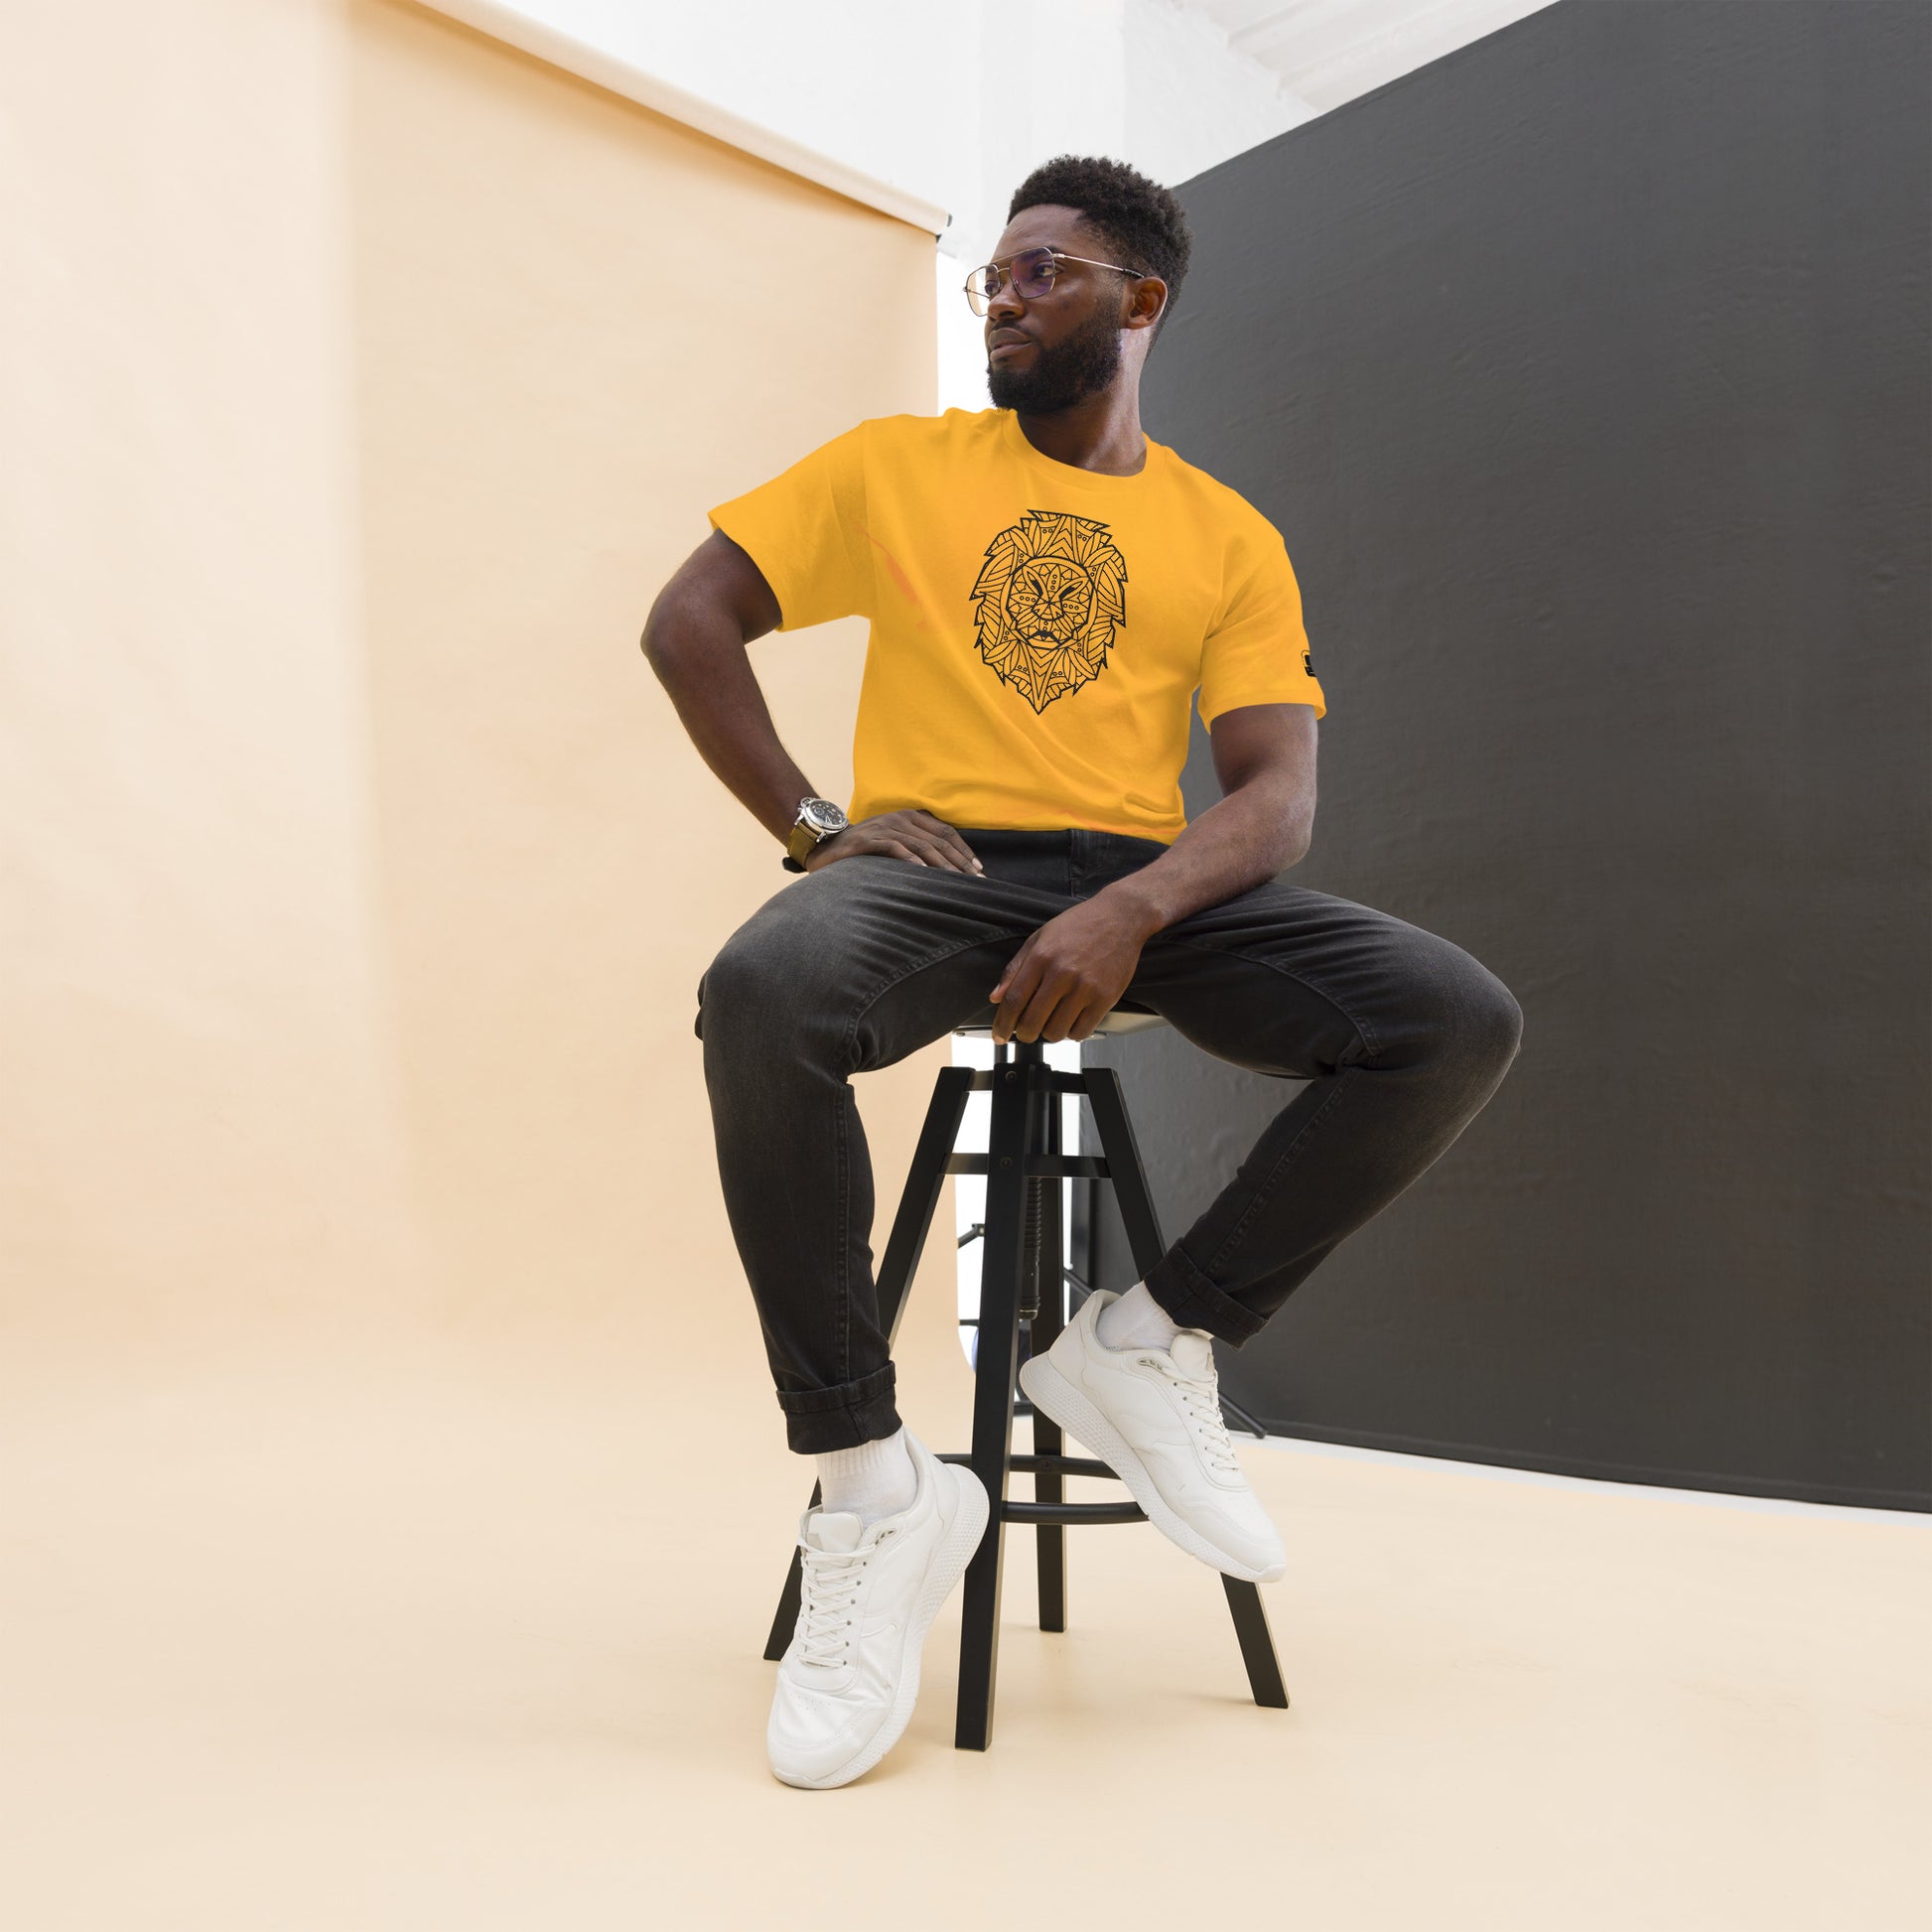 Stylish man in glasses perched on a stool, sporting a mustard yellow t-shirt with a bold black lion head graphic, paired with dark jeans and white sneakers, in a room with contrasting beige and black walls.